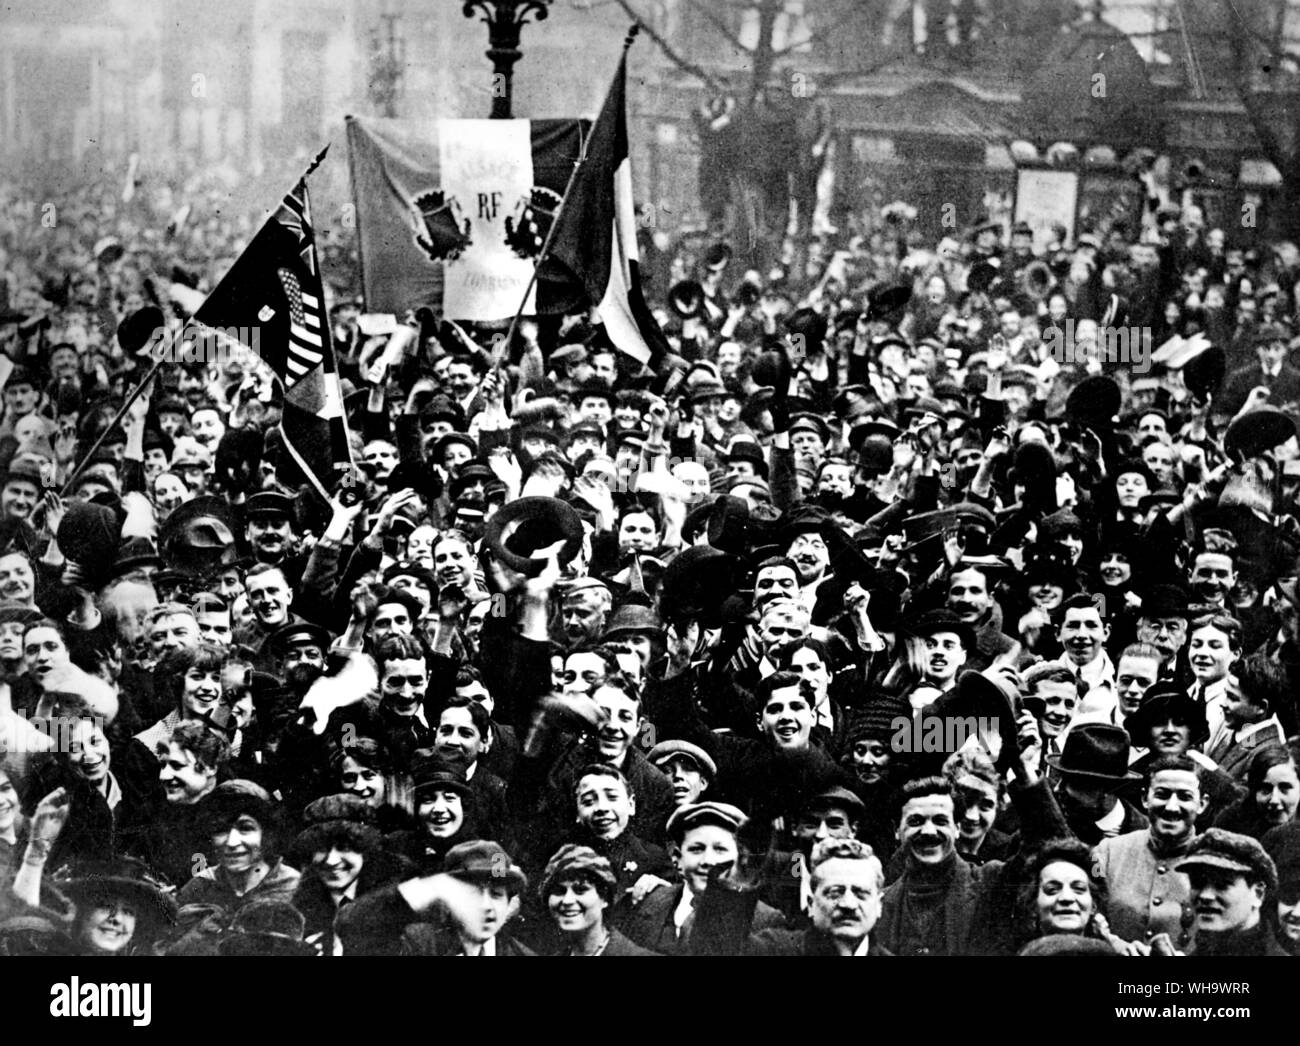 Ww1: France. The Boulevards of Paris were thronged with people- laughing, singing and cheering - as the news of the Armistice swept through the French capital on the 11th November 1918. Stock Photo